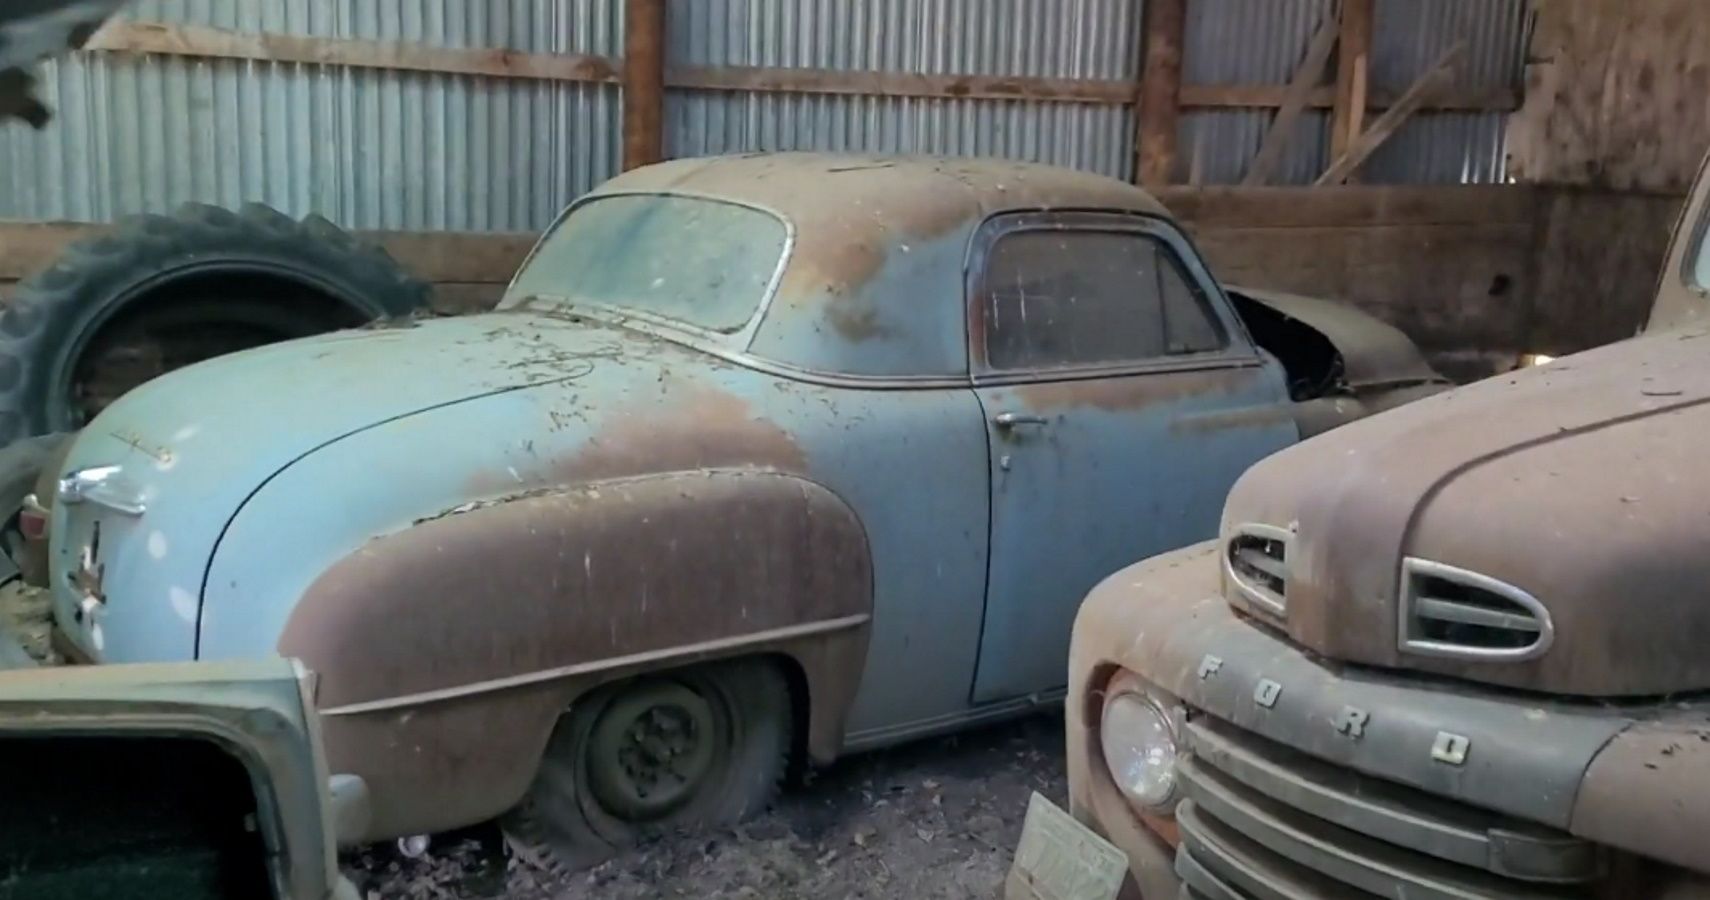 A Plymouth and Ford in this North Dakota Barnfind